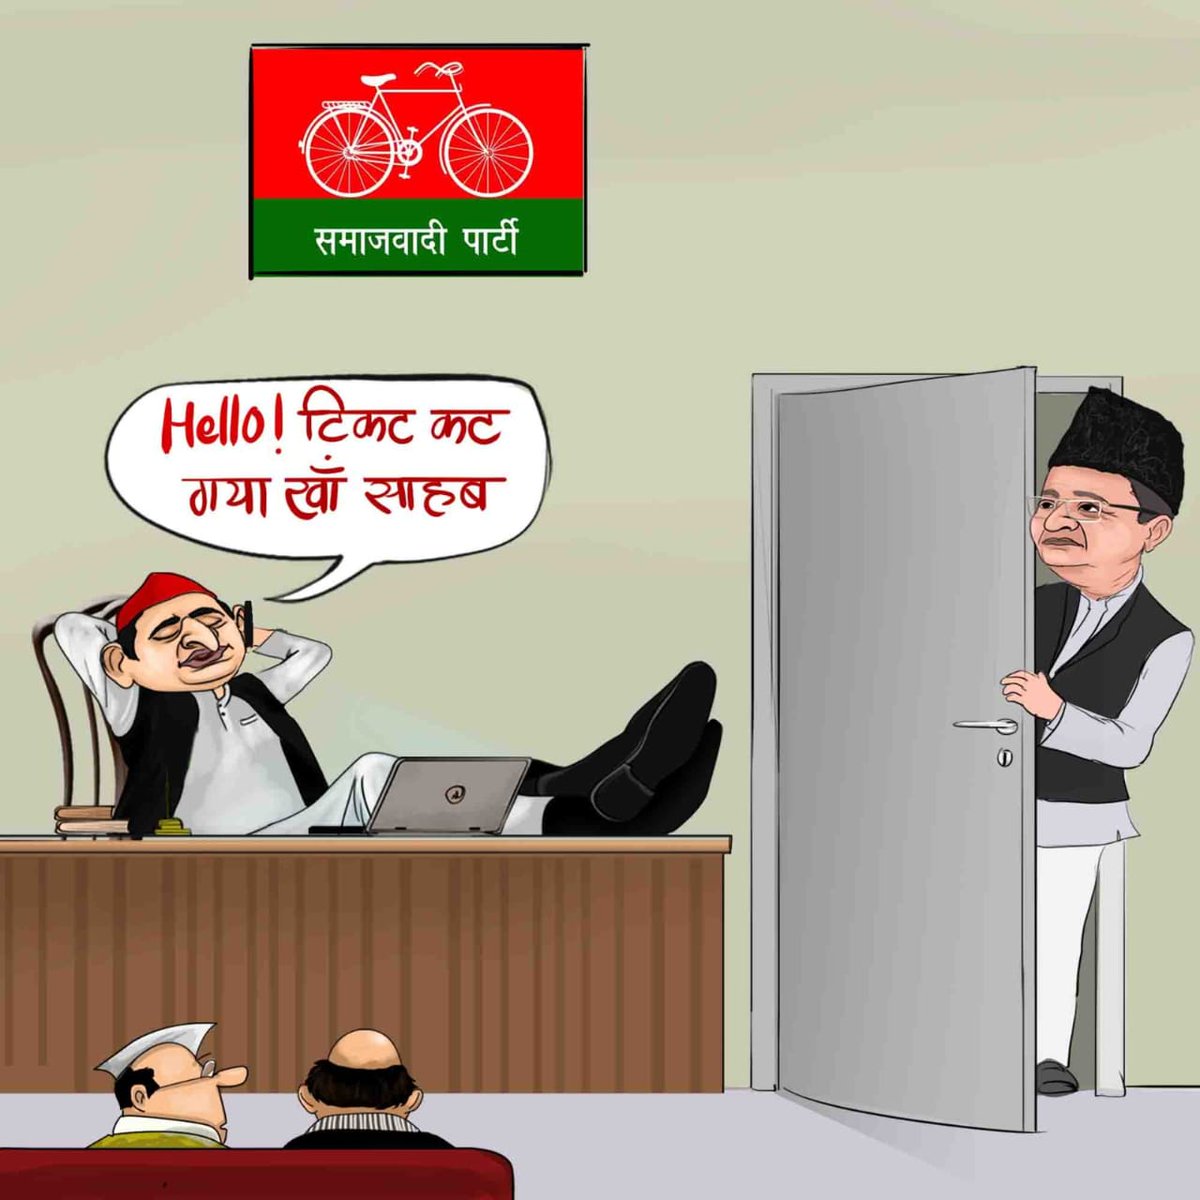 Akhilesh Yadav visiting the home of Mukhtar Ansari seems to have not gone down too well with many political experts.
#MukhtarKaMukhota